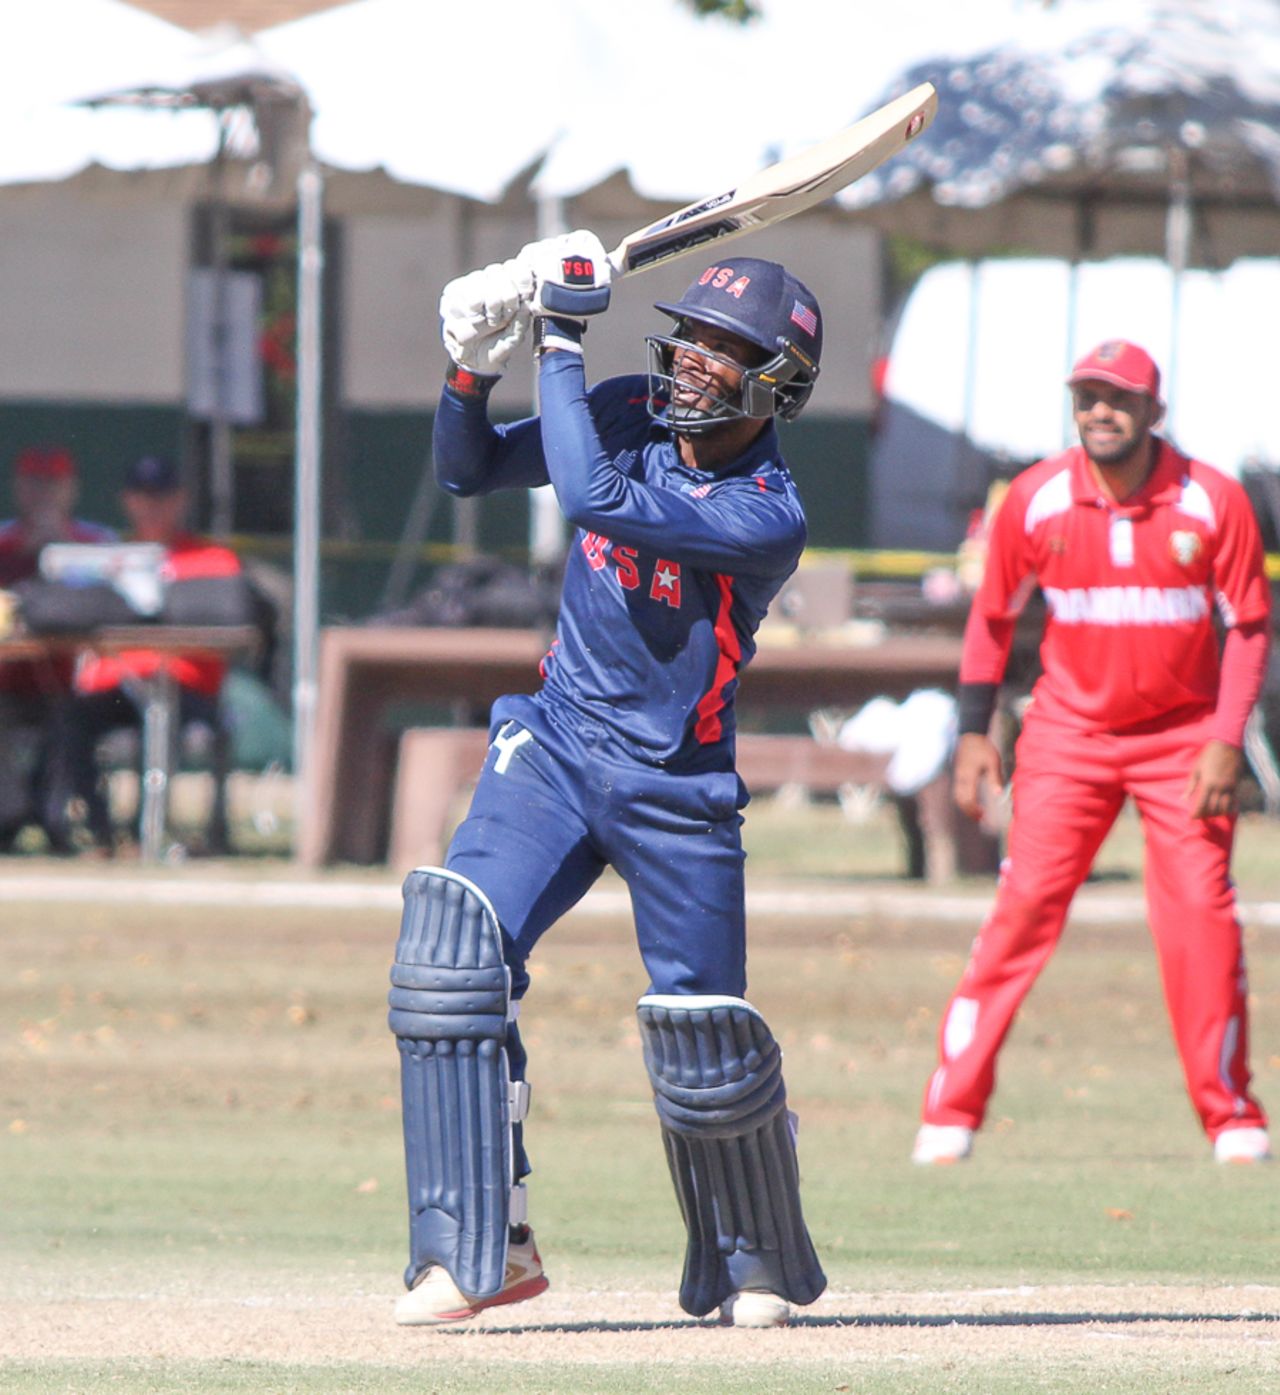 Akeem Dodson drives down the ground for a straight six, USA v Denmark, ICC World Cricket League Division Four, Los Angeles, November 2, 2016